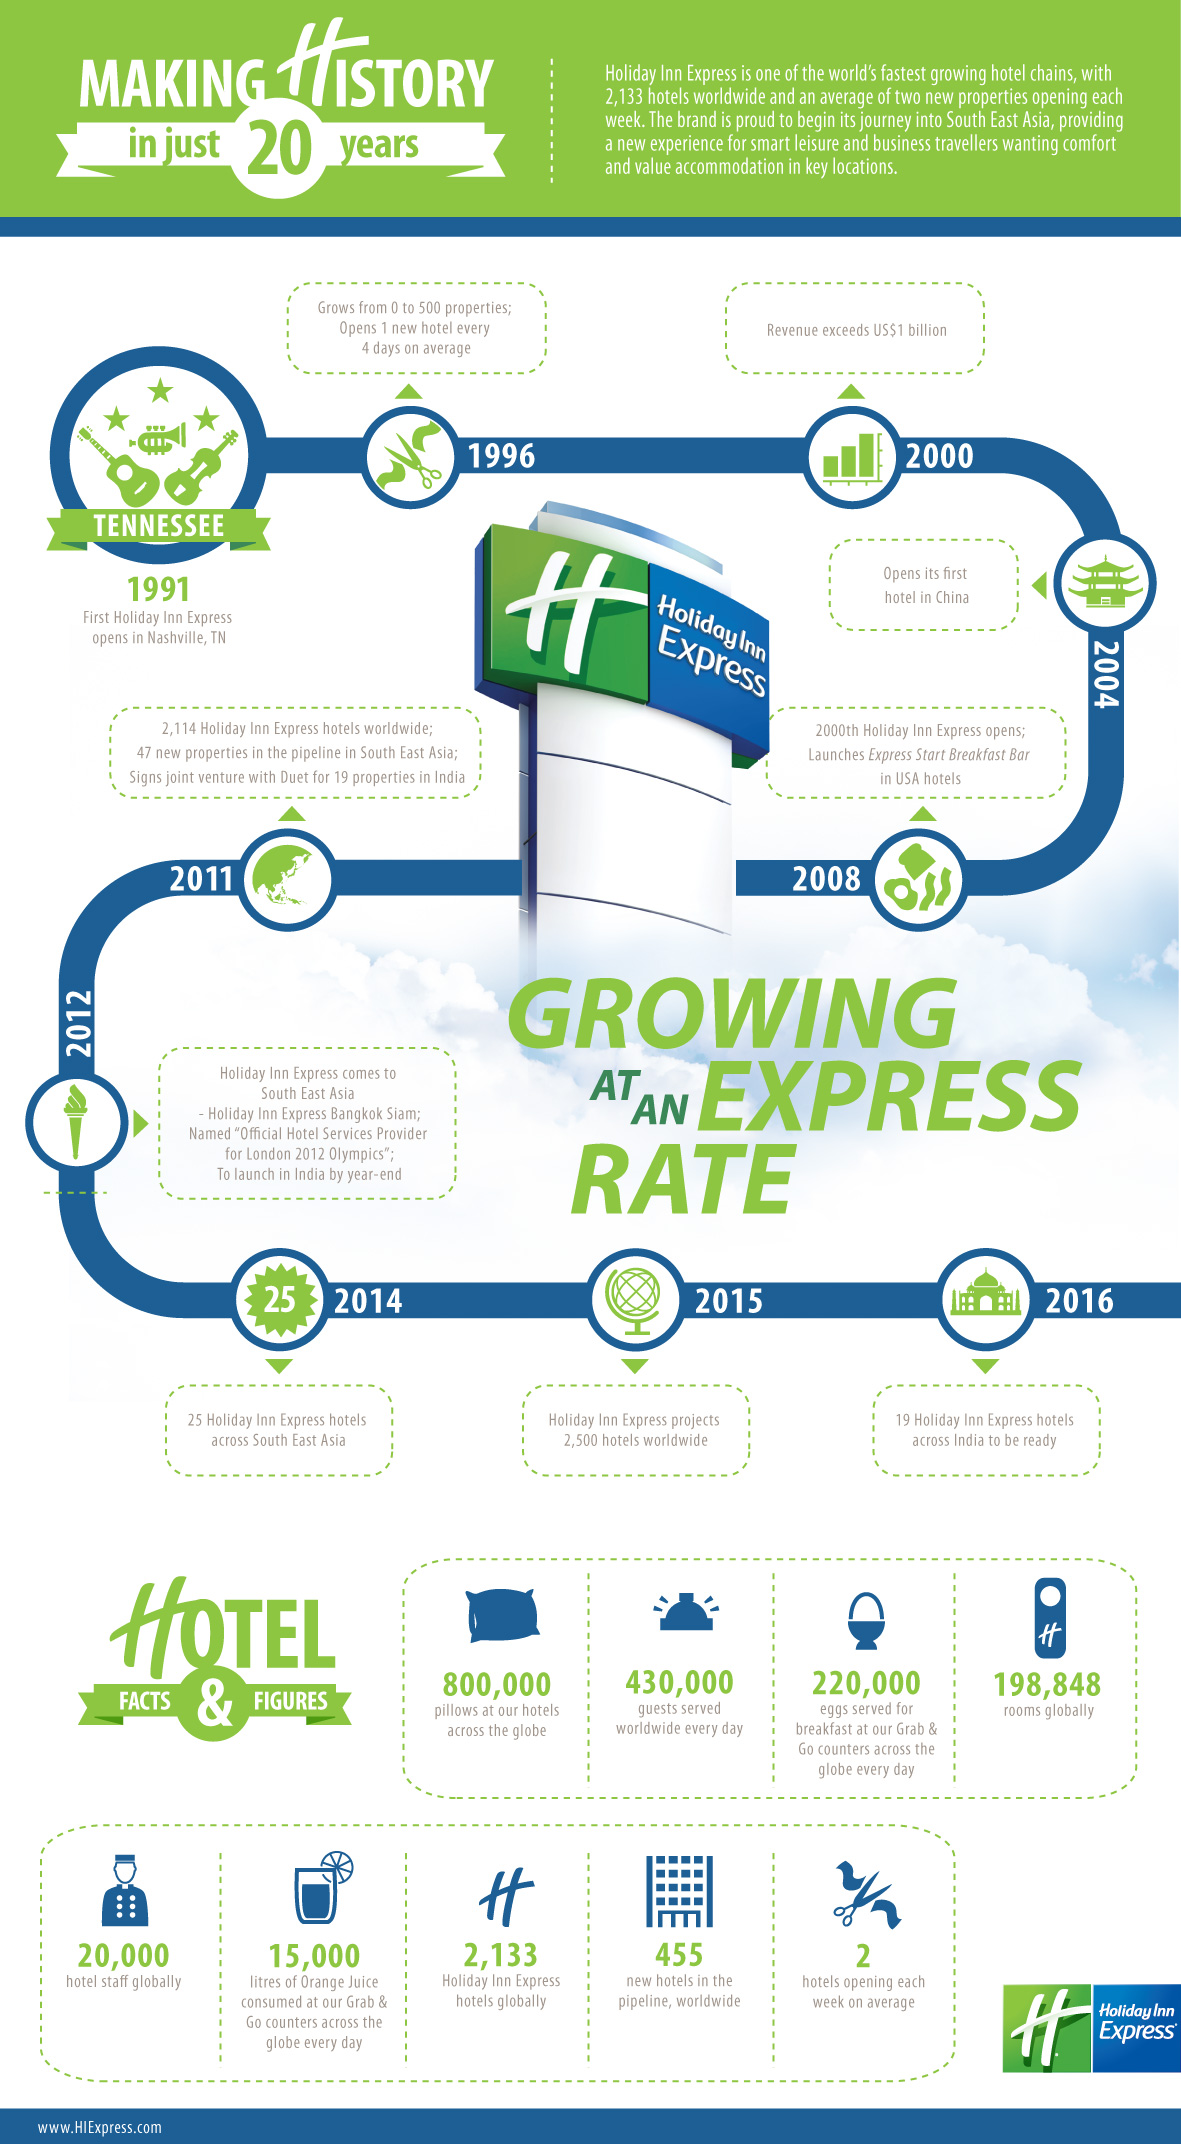 The Growth of Holiday Inn Express